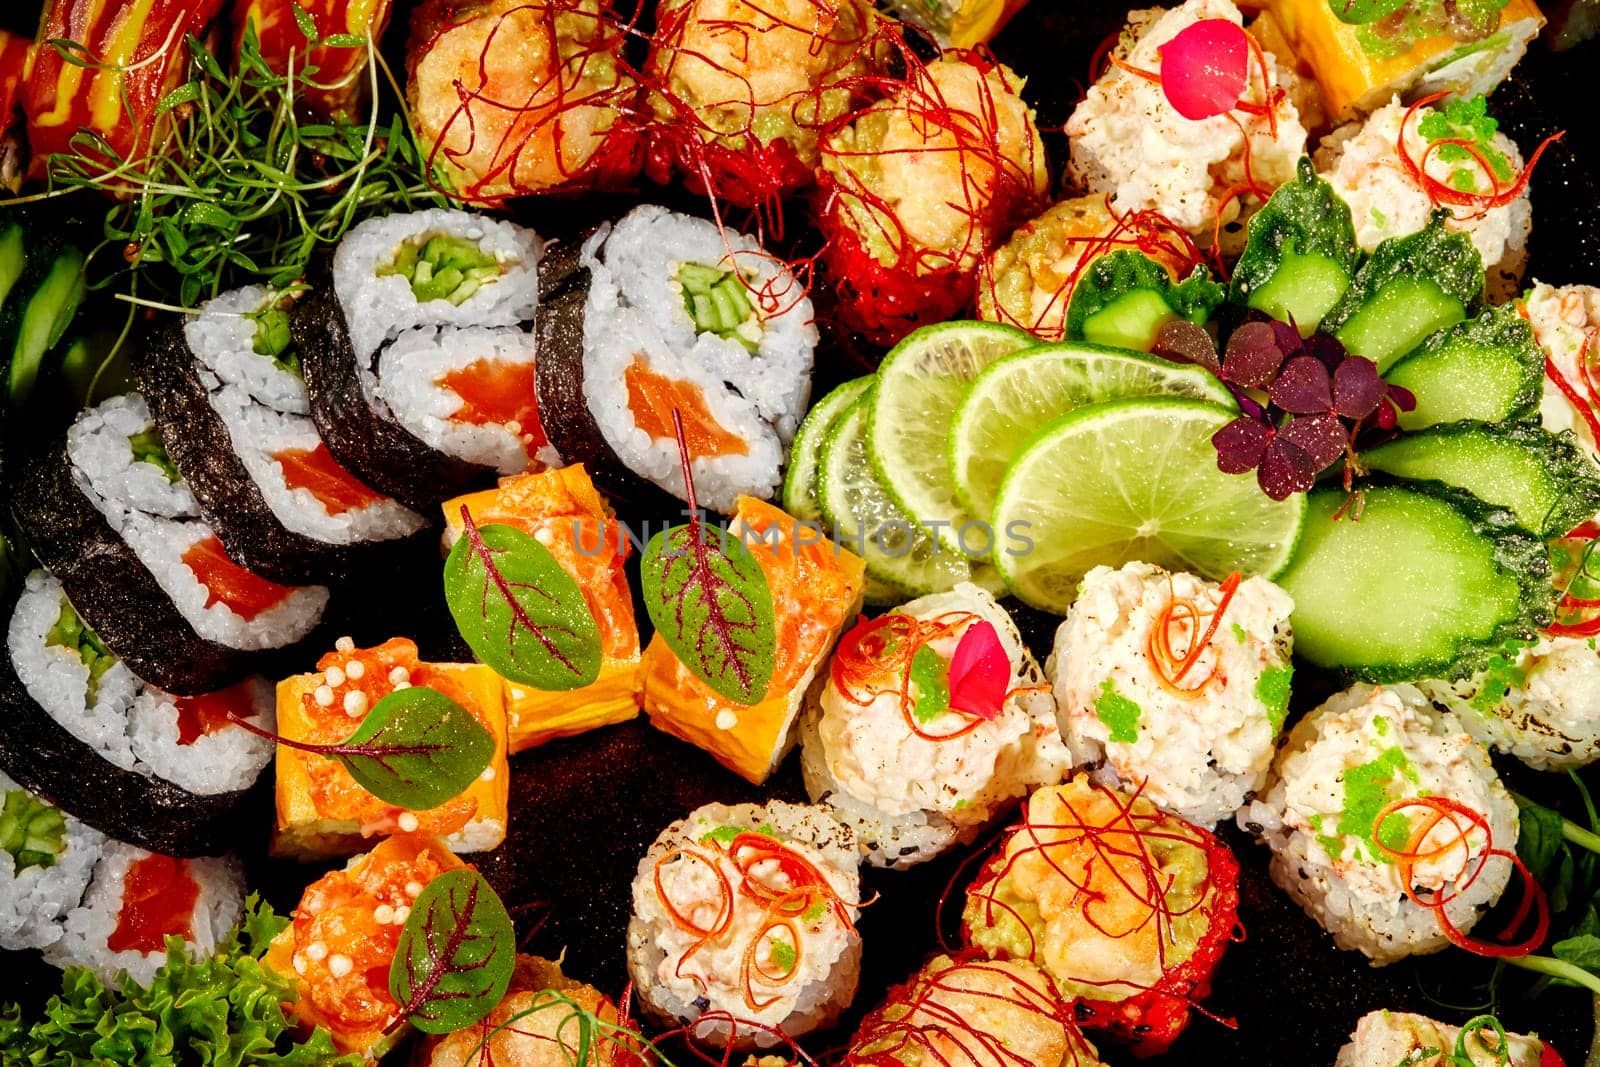 Richly adorned sushi rolls assortment with various toppings by nazarovsergey